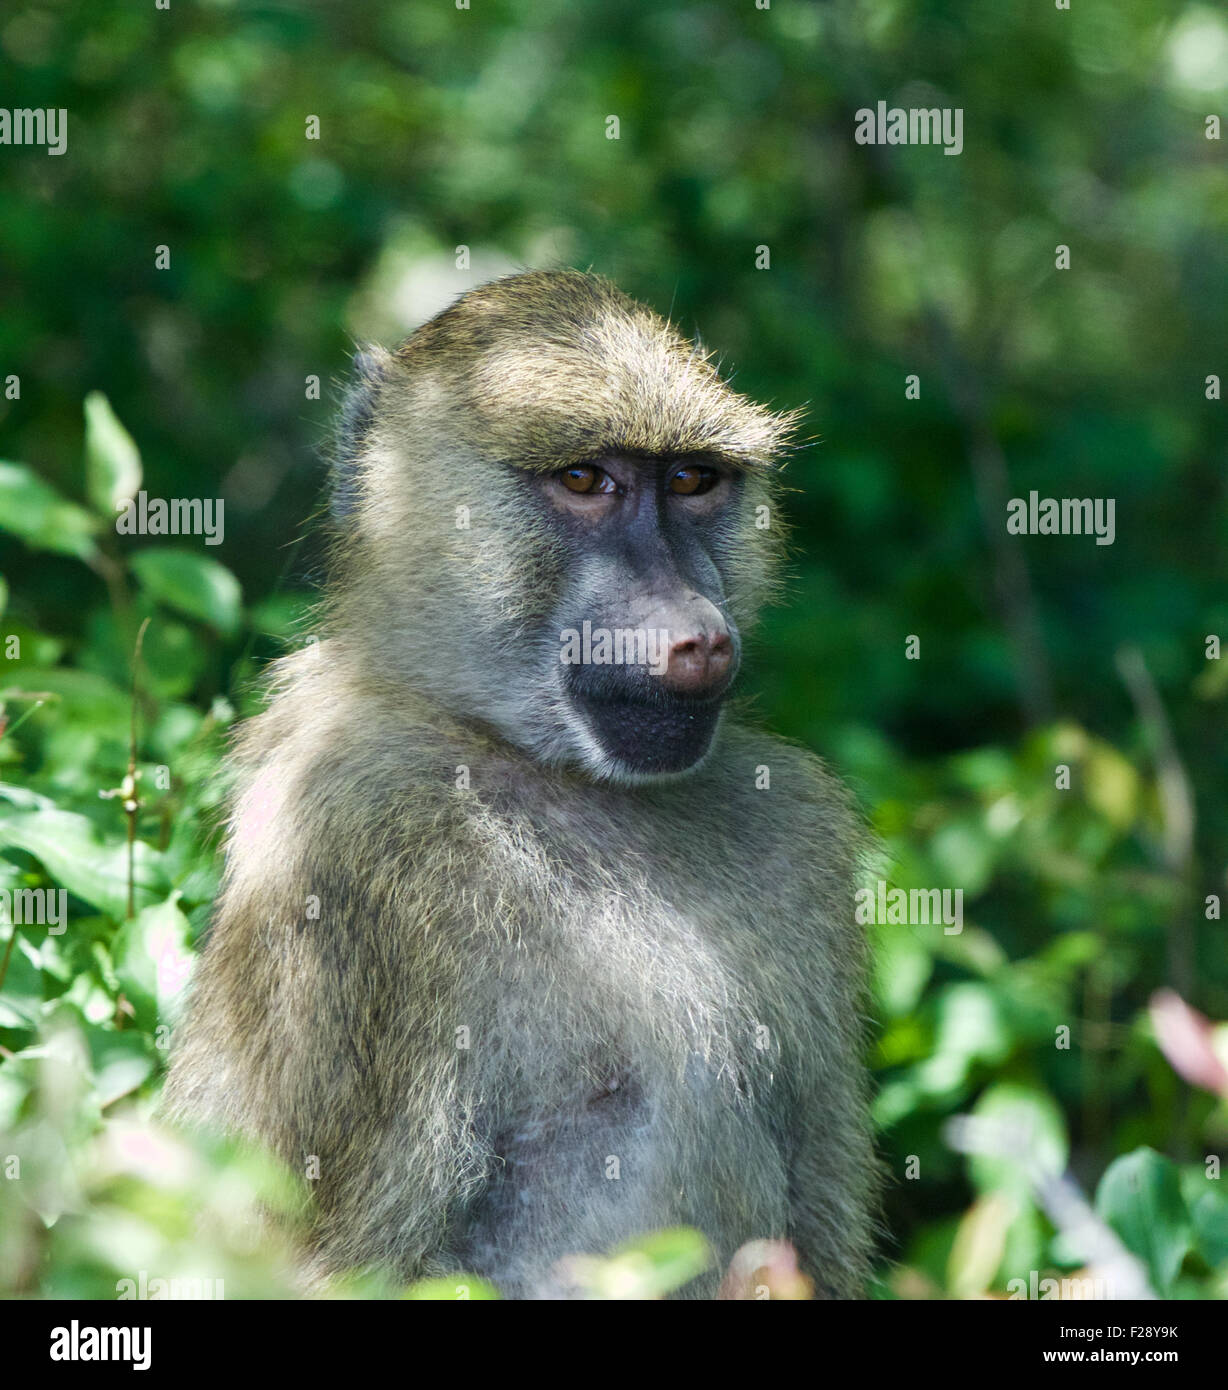 The funny's monkey close-up with the green background Stock Photo